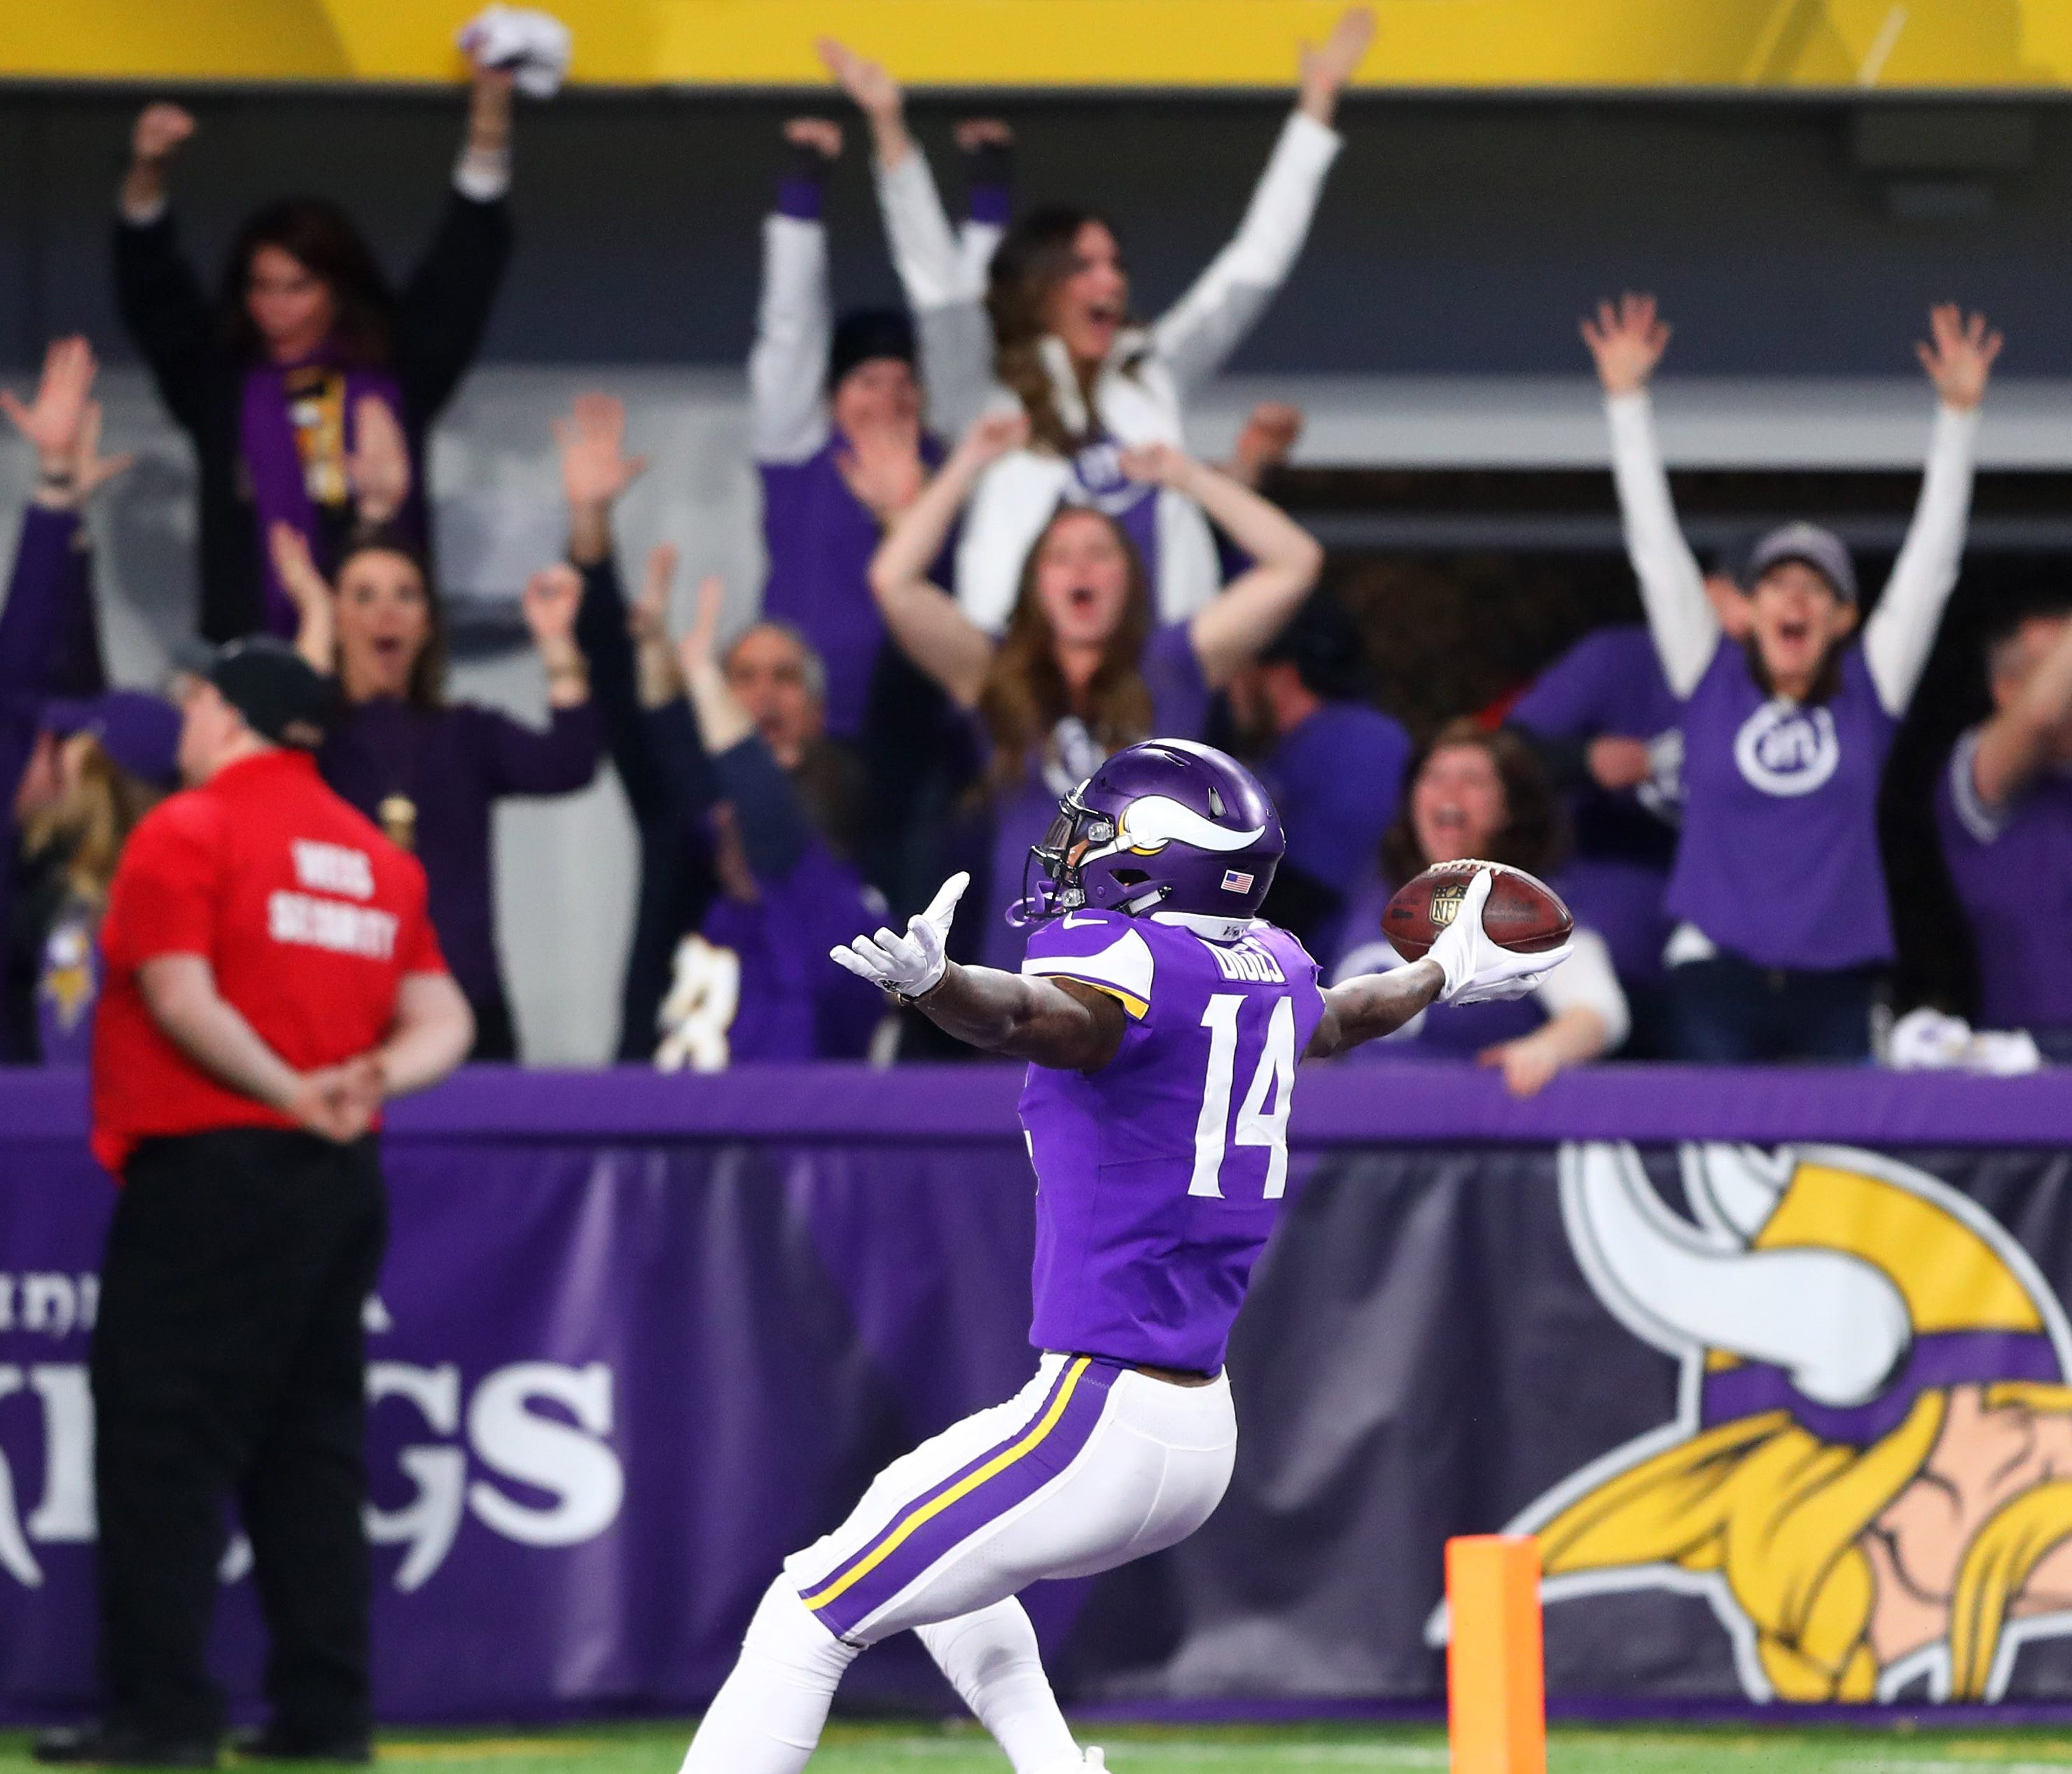 Minnesota Vikings wide receiver Stefon Diggs celebrates as he scores the game winning touchdown against the New Orleans Saints at U.S. Bank Stadium.